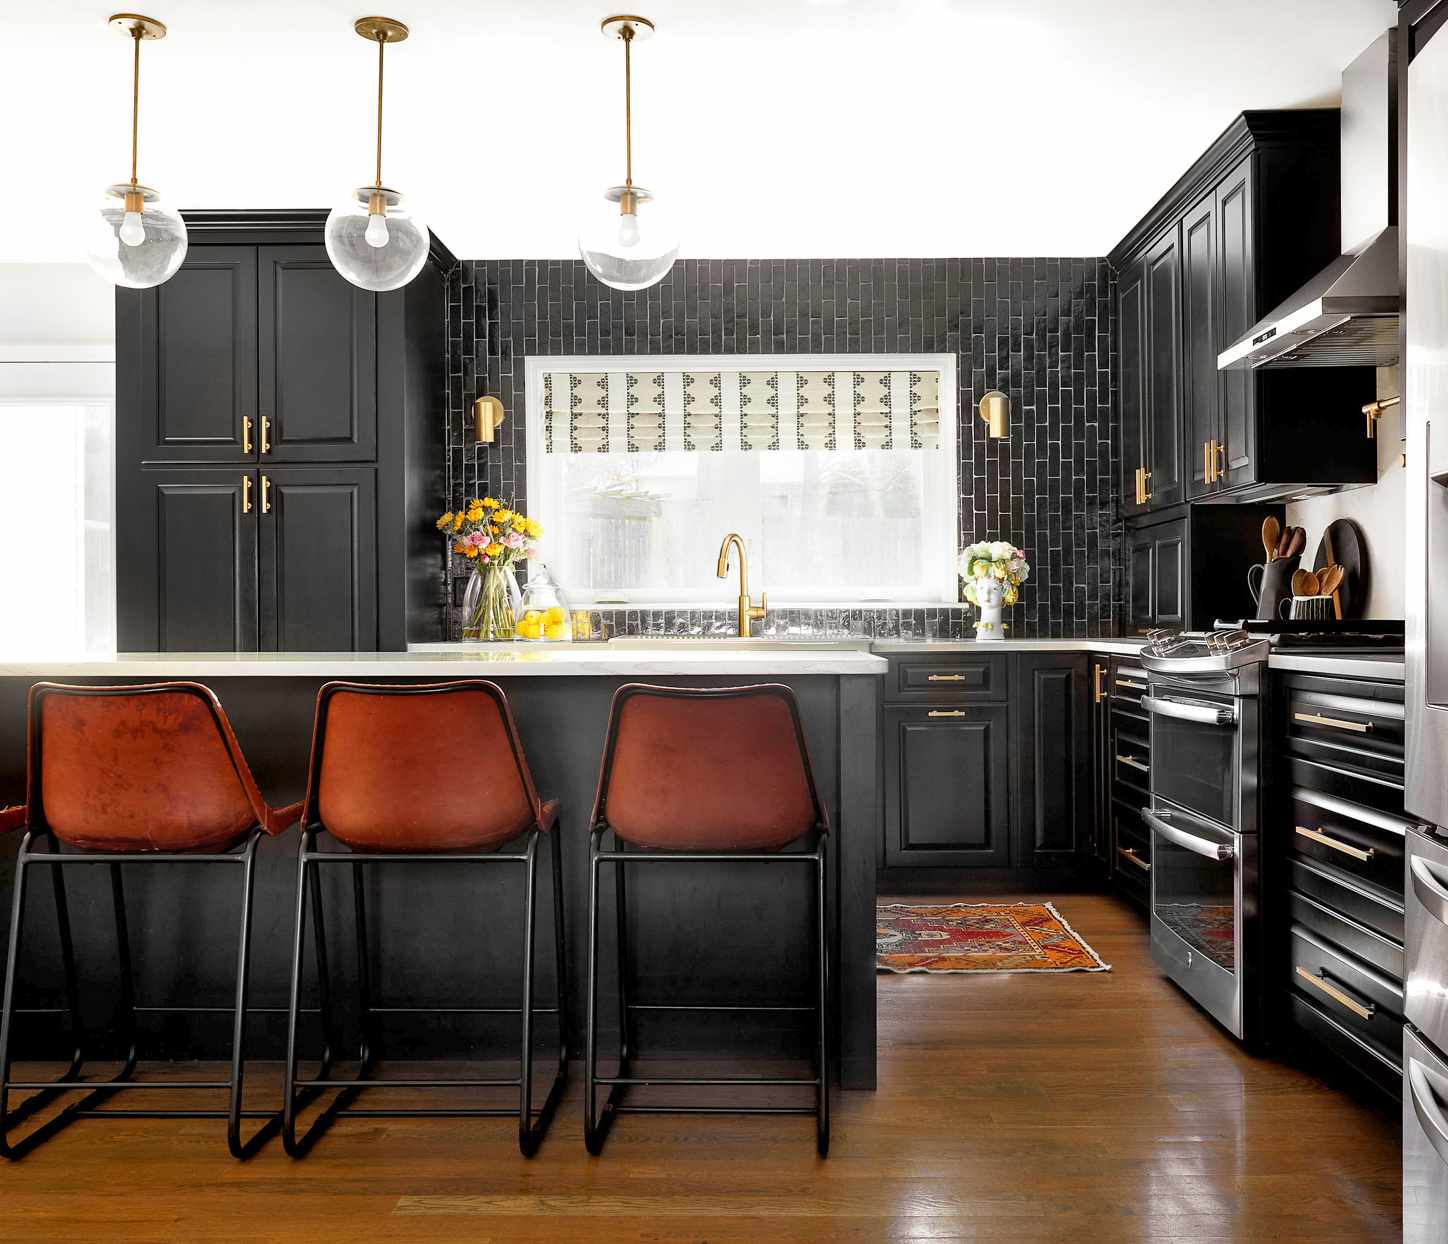 This Kitchen with Dramatic Black Details Proves Exactly Why We Love the Color